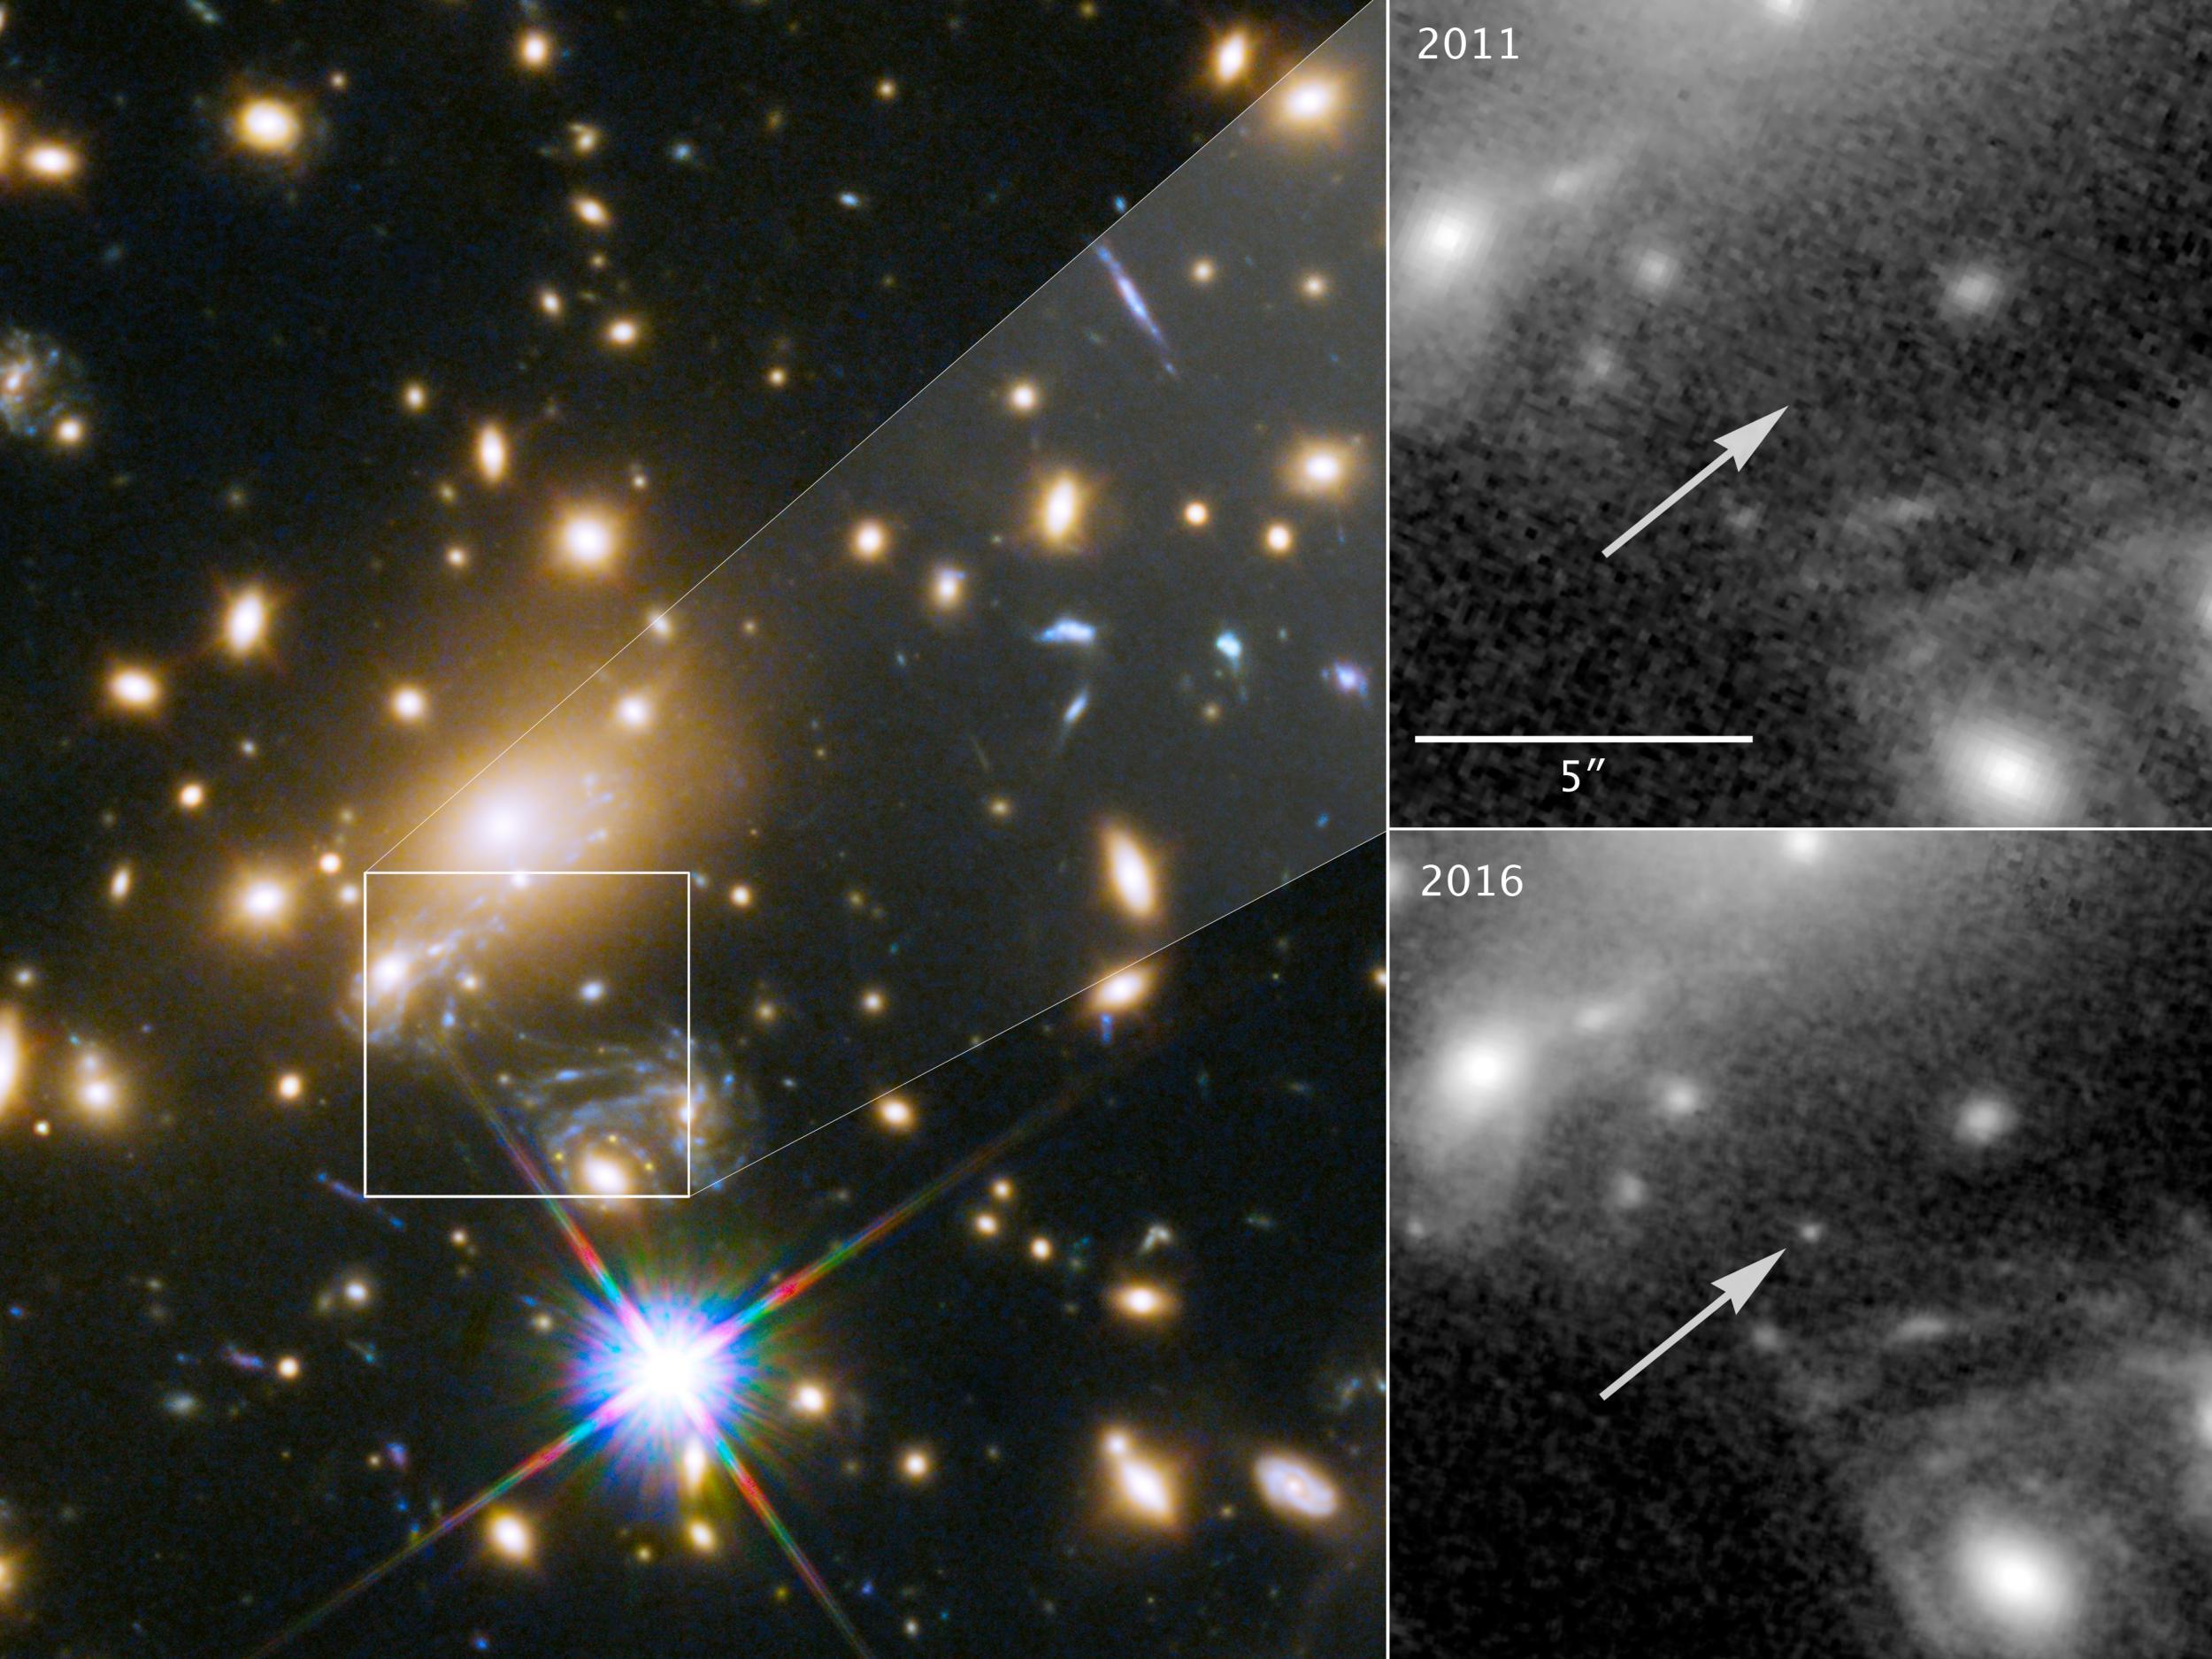 While monitoring a supernova, a team of astronomers noticed a point of light emerging, which they later realised was the most distant individual star ever identified